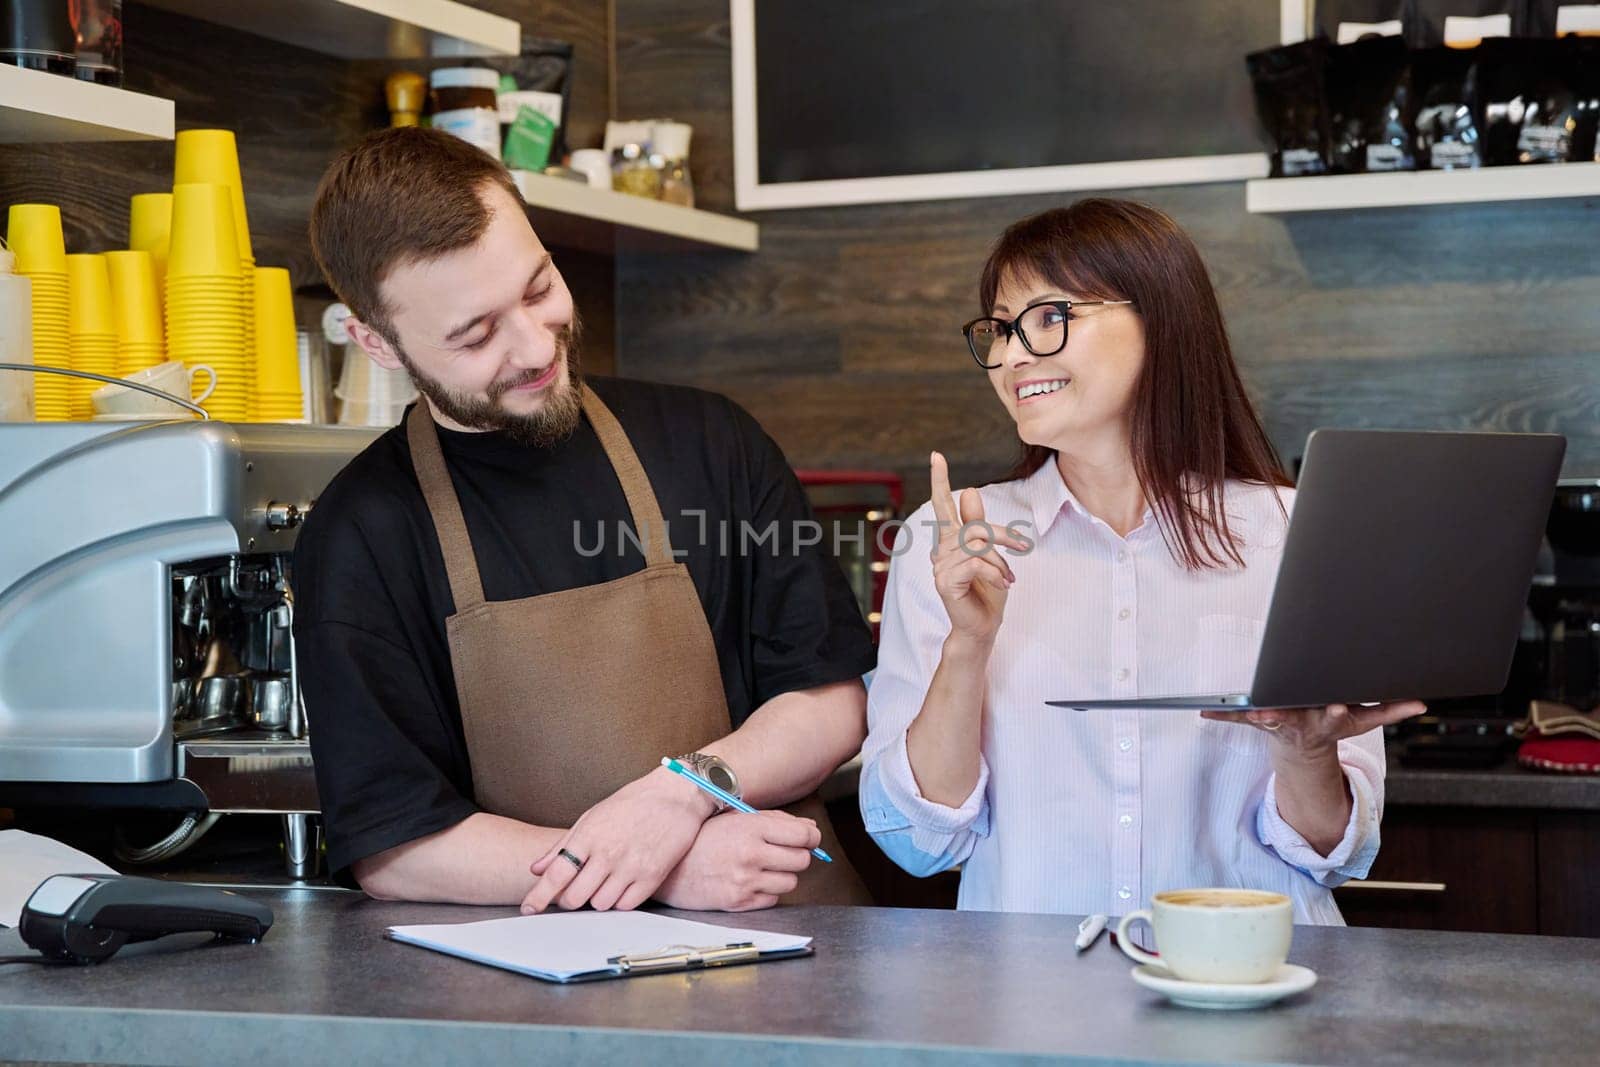 Team, partners, young male and mature woman talking working using laptop standing behind bar in coffee shop. Team, small business, work, staff, cafe cafeteria restaurant, entrepreneurship concept